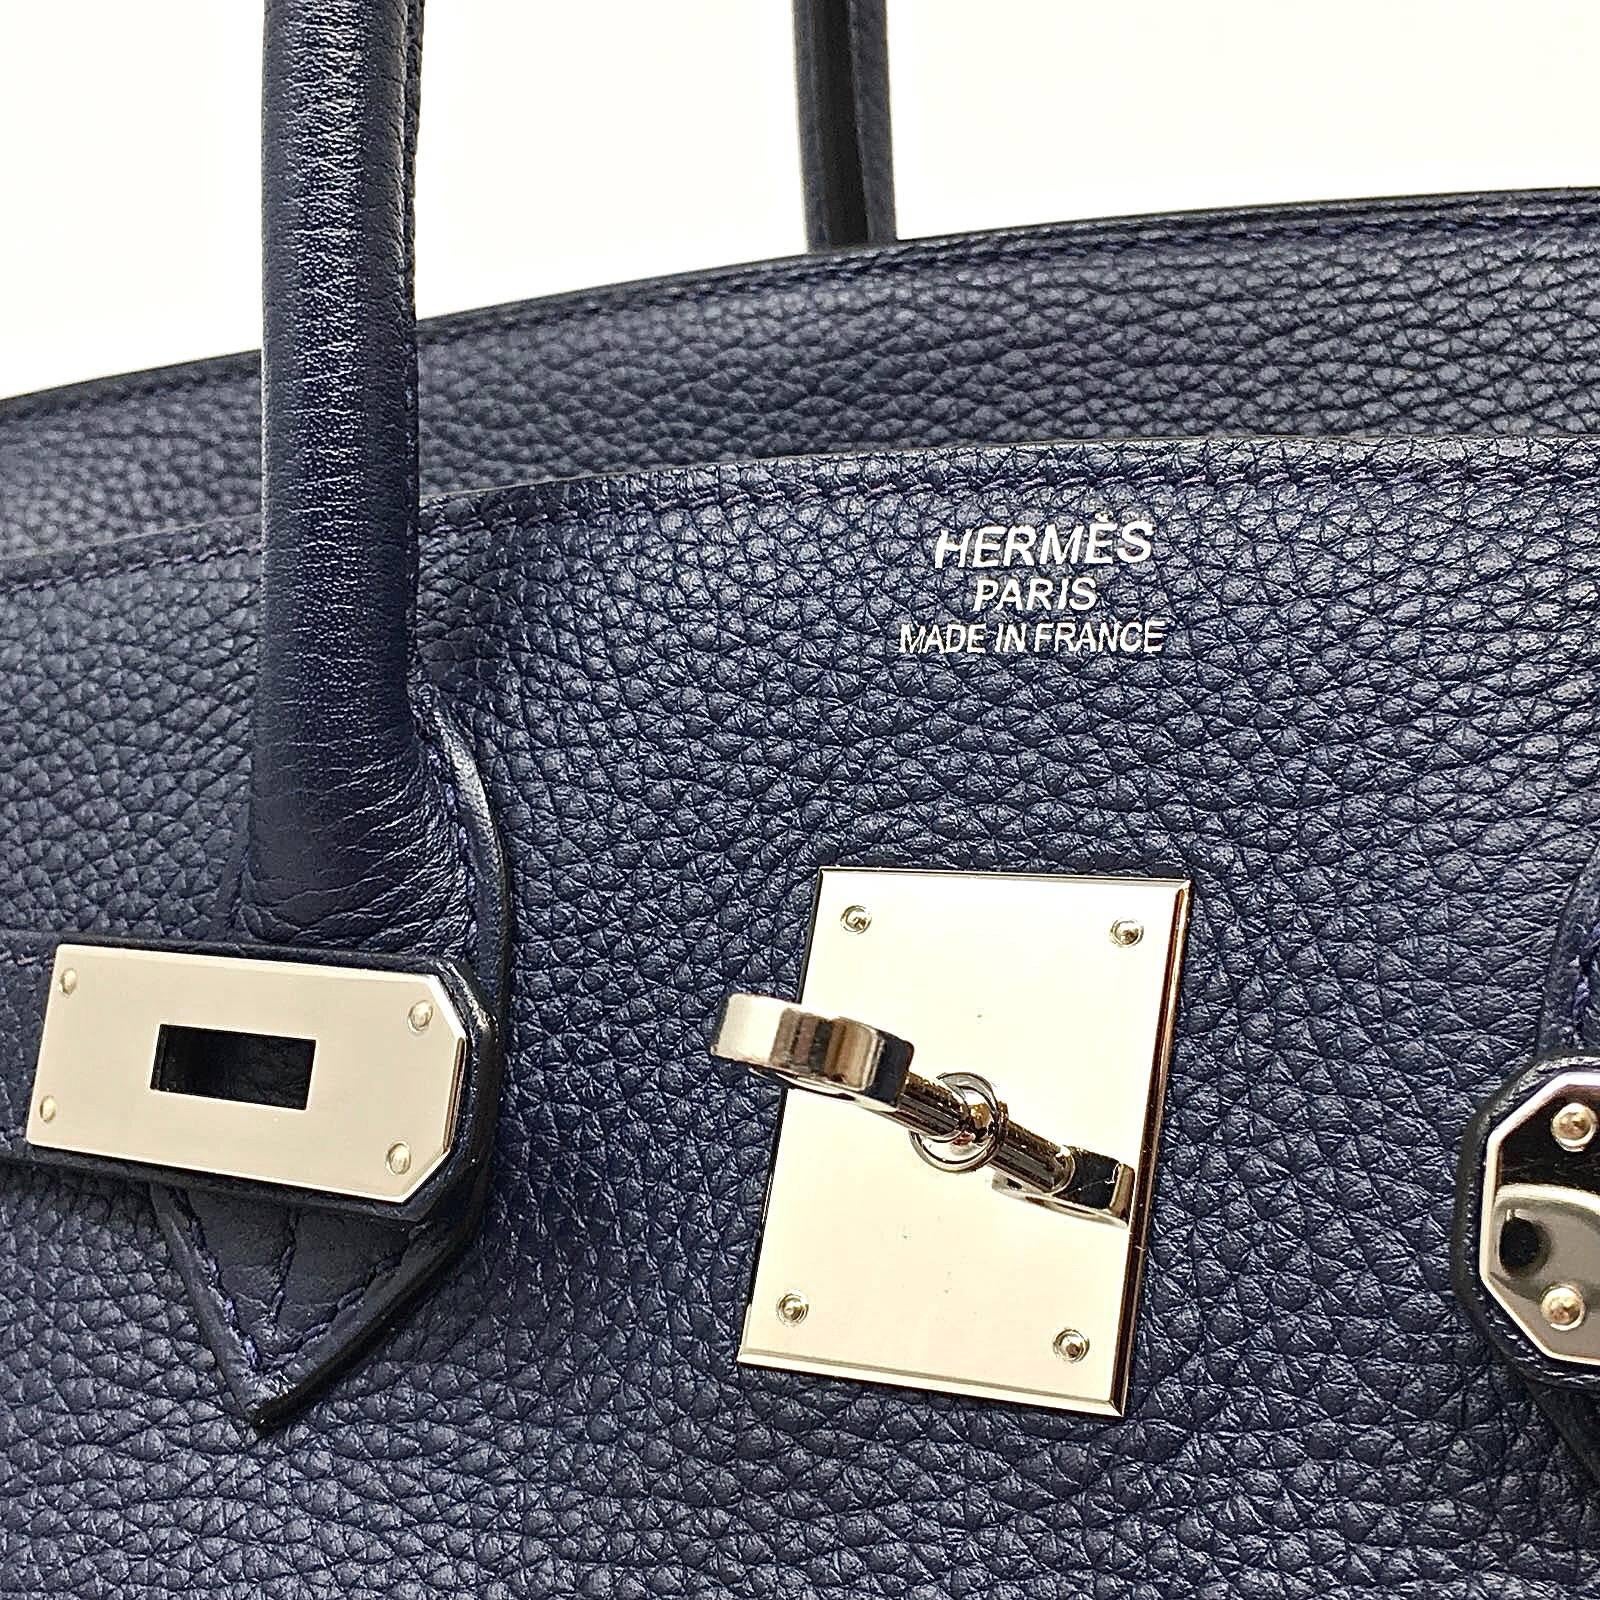 Hermes Paris Sac Birkin 35, Veau Togo Leather, Year 2009. Comes with keys, lock, clochette, rain protector, and orange Hermes box. Blue Prussian Leather, with fresh palladium hardware is a very modern and sophisticated combination. Very Good